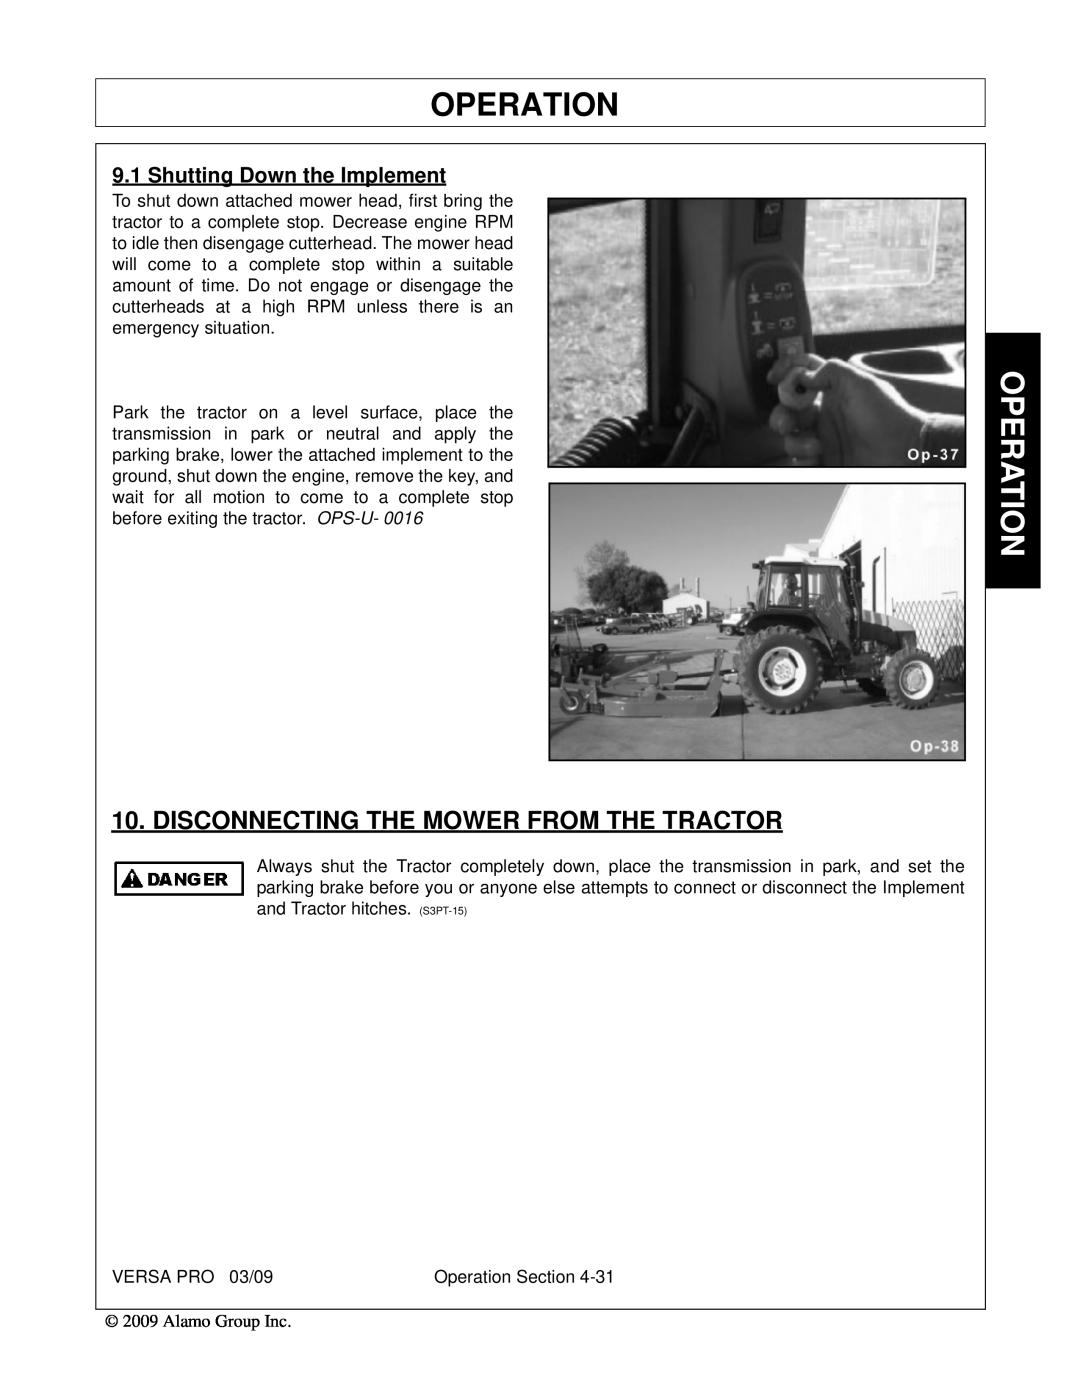 Alamo 803350C manual Disconnecting The Mower From The Tractor, Shutting Down the Implement, Operation 